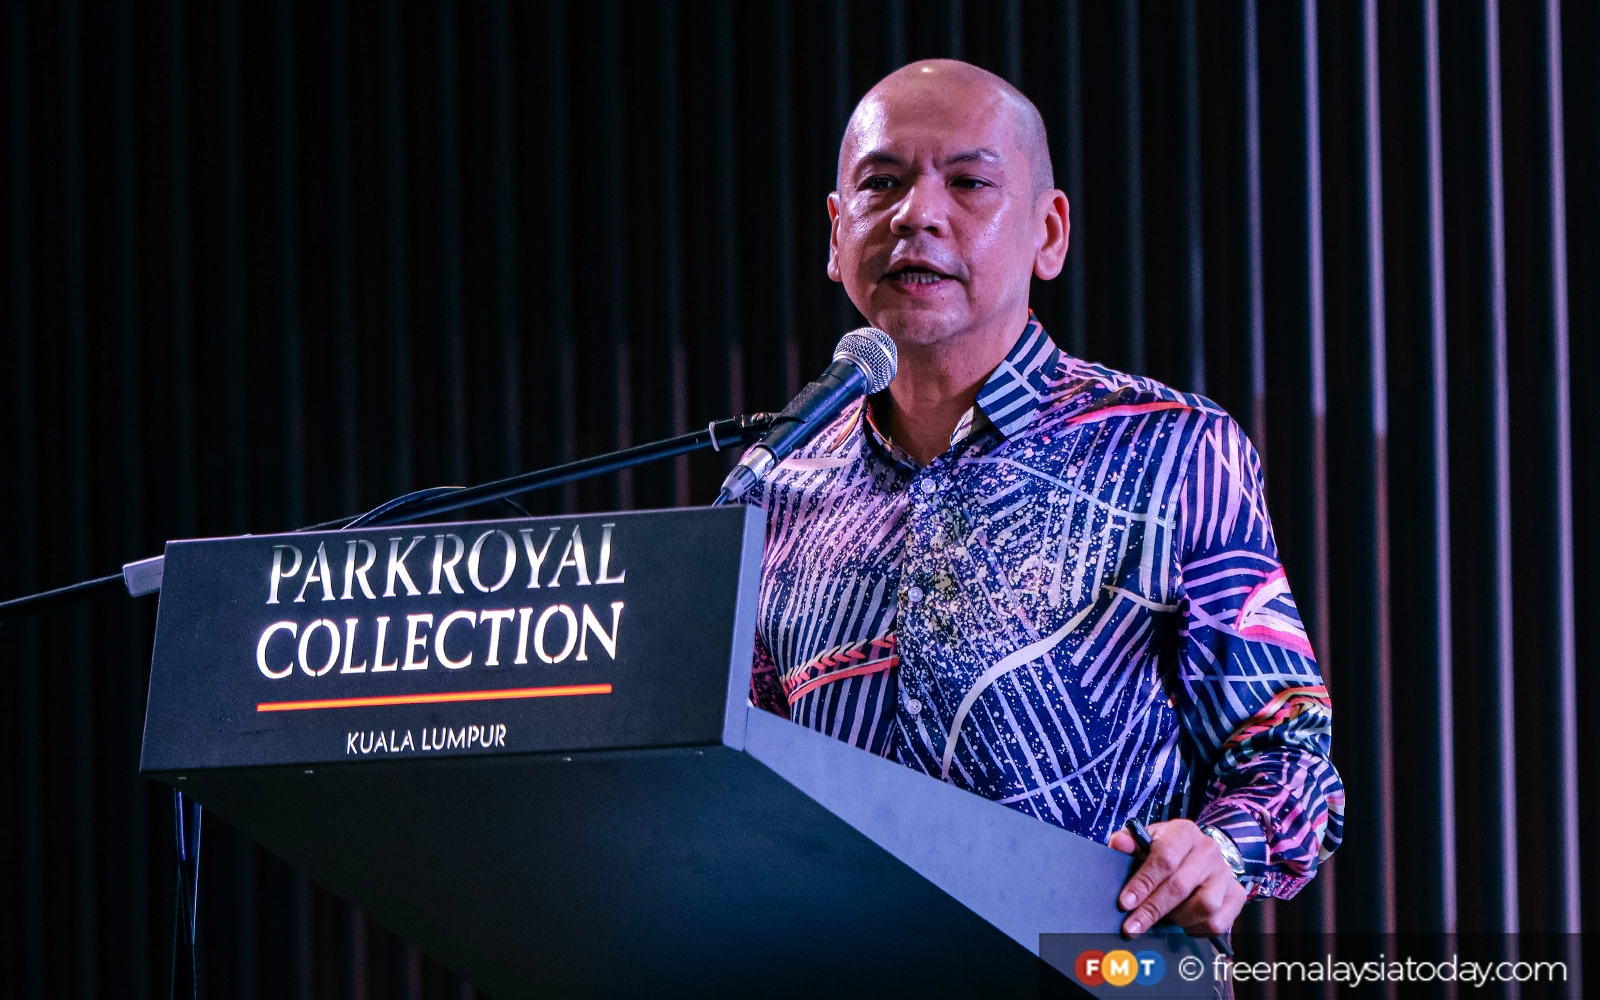 govt must ensure artistes earn income through royalties, says minister